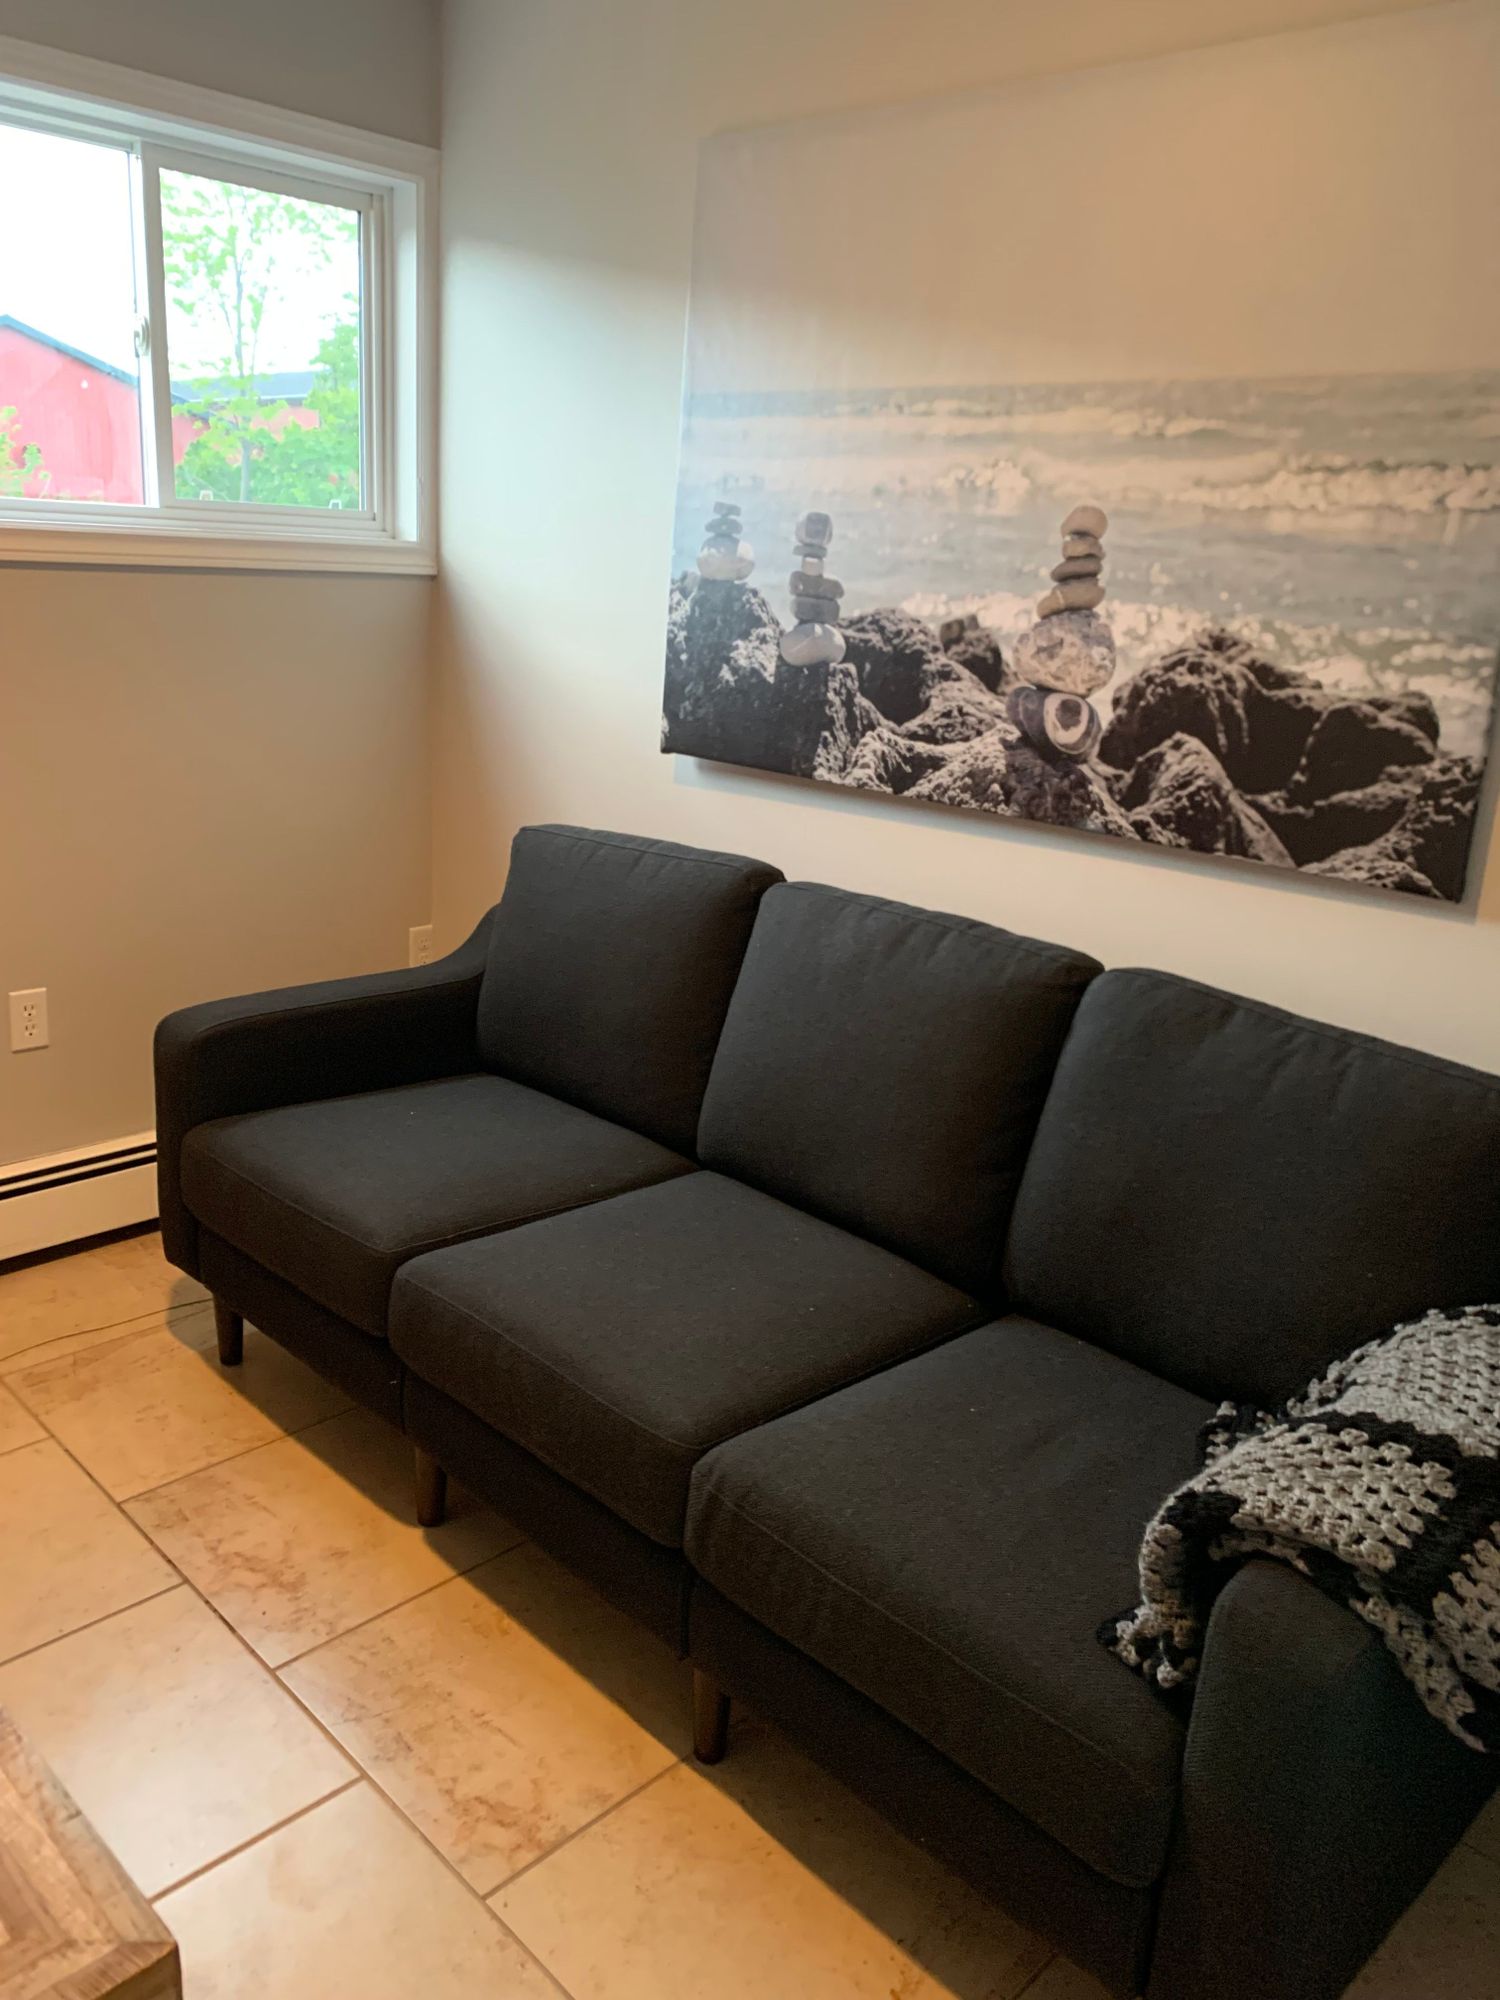 Gallery Photo of Family Therapy Room 
